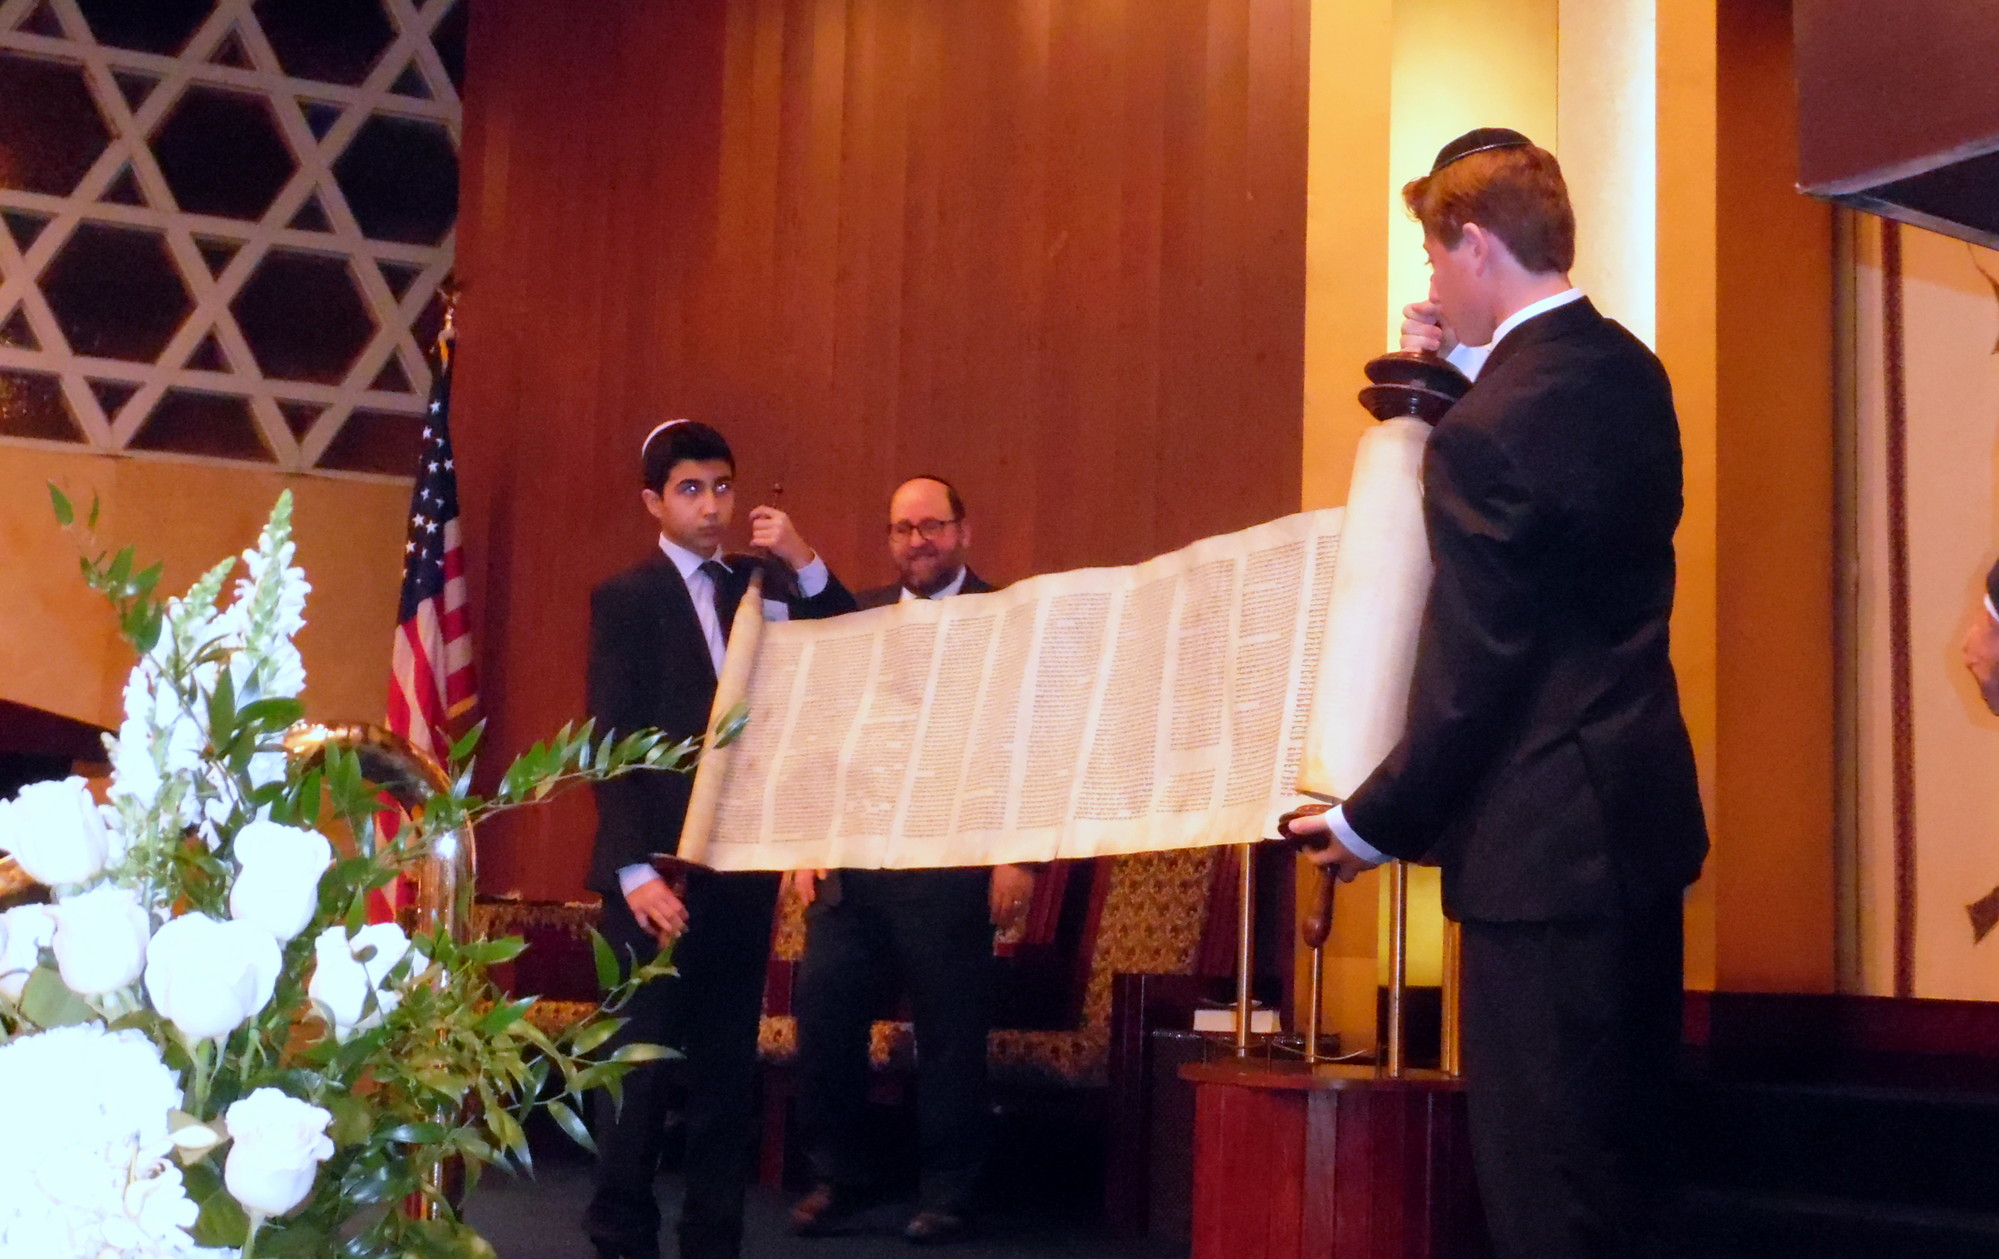 Bar Mitzvah boys Jesse Herrnson, left, and Adam Polokoff displayed the scroll at the Kristallnacht Commemoration and Torah rededication ceremony, as the temple’s Rabbi Andrew Warmflash looks on.